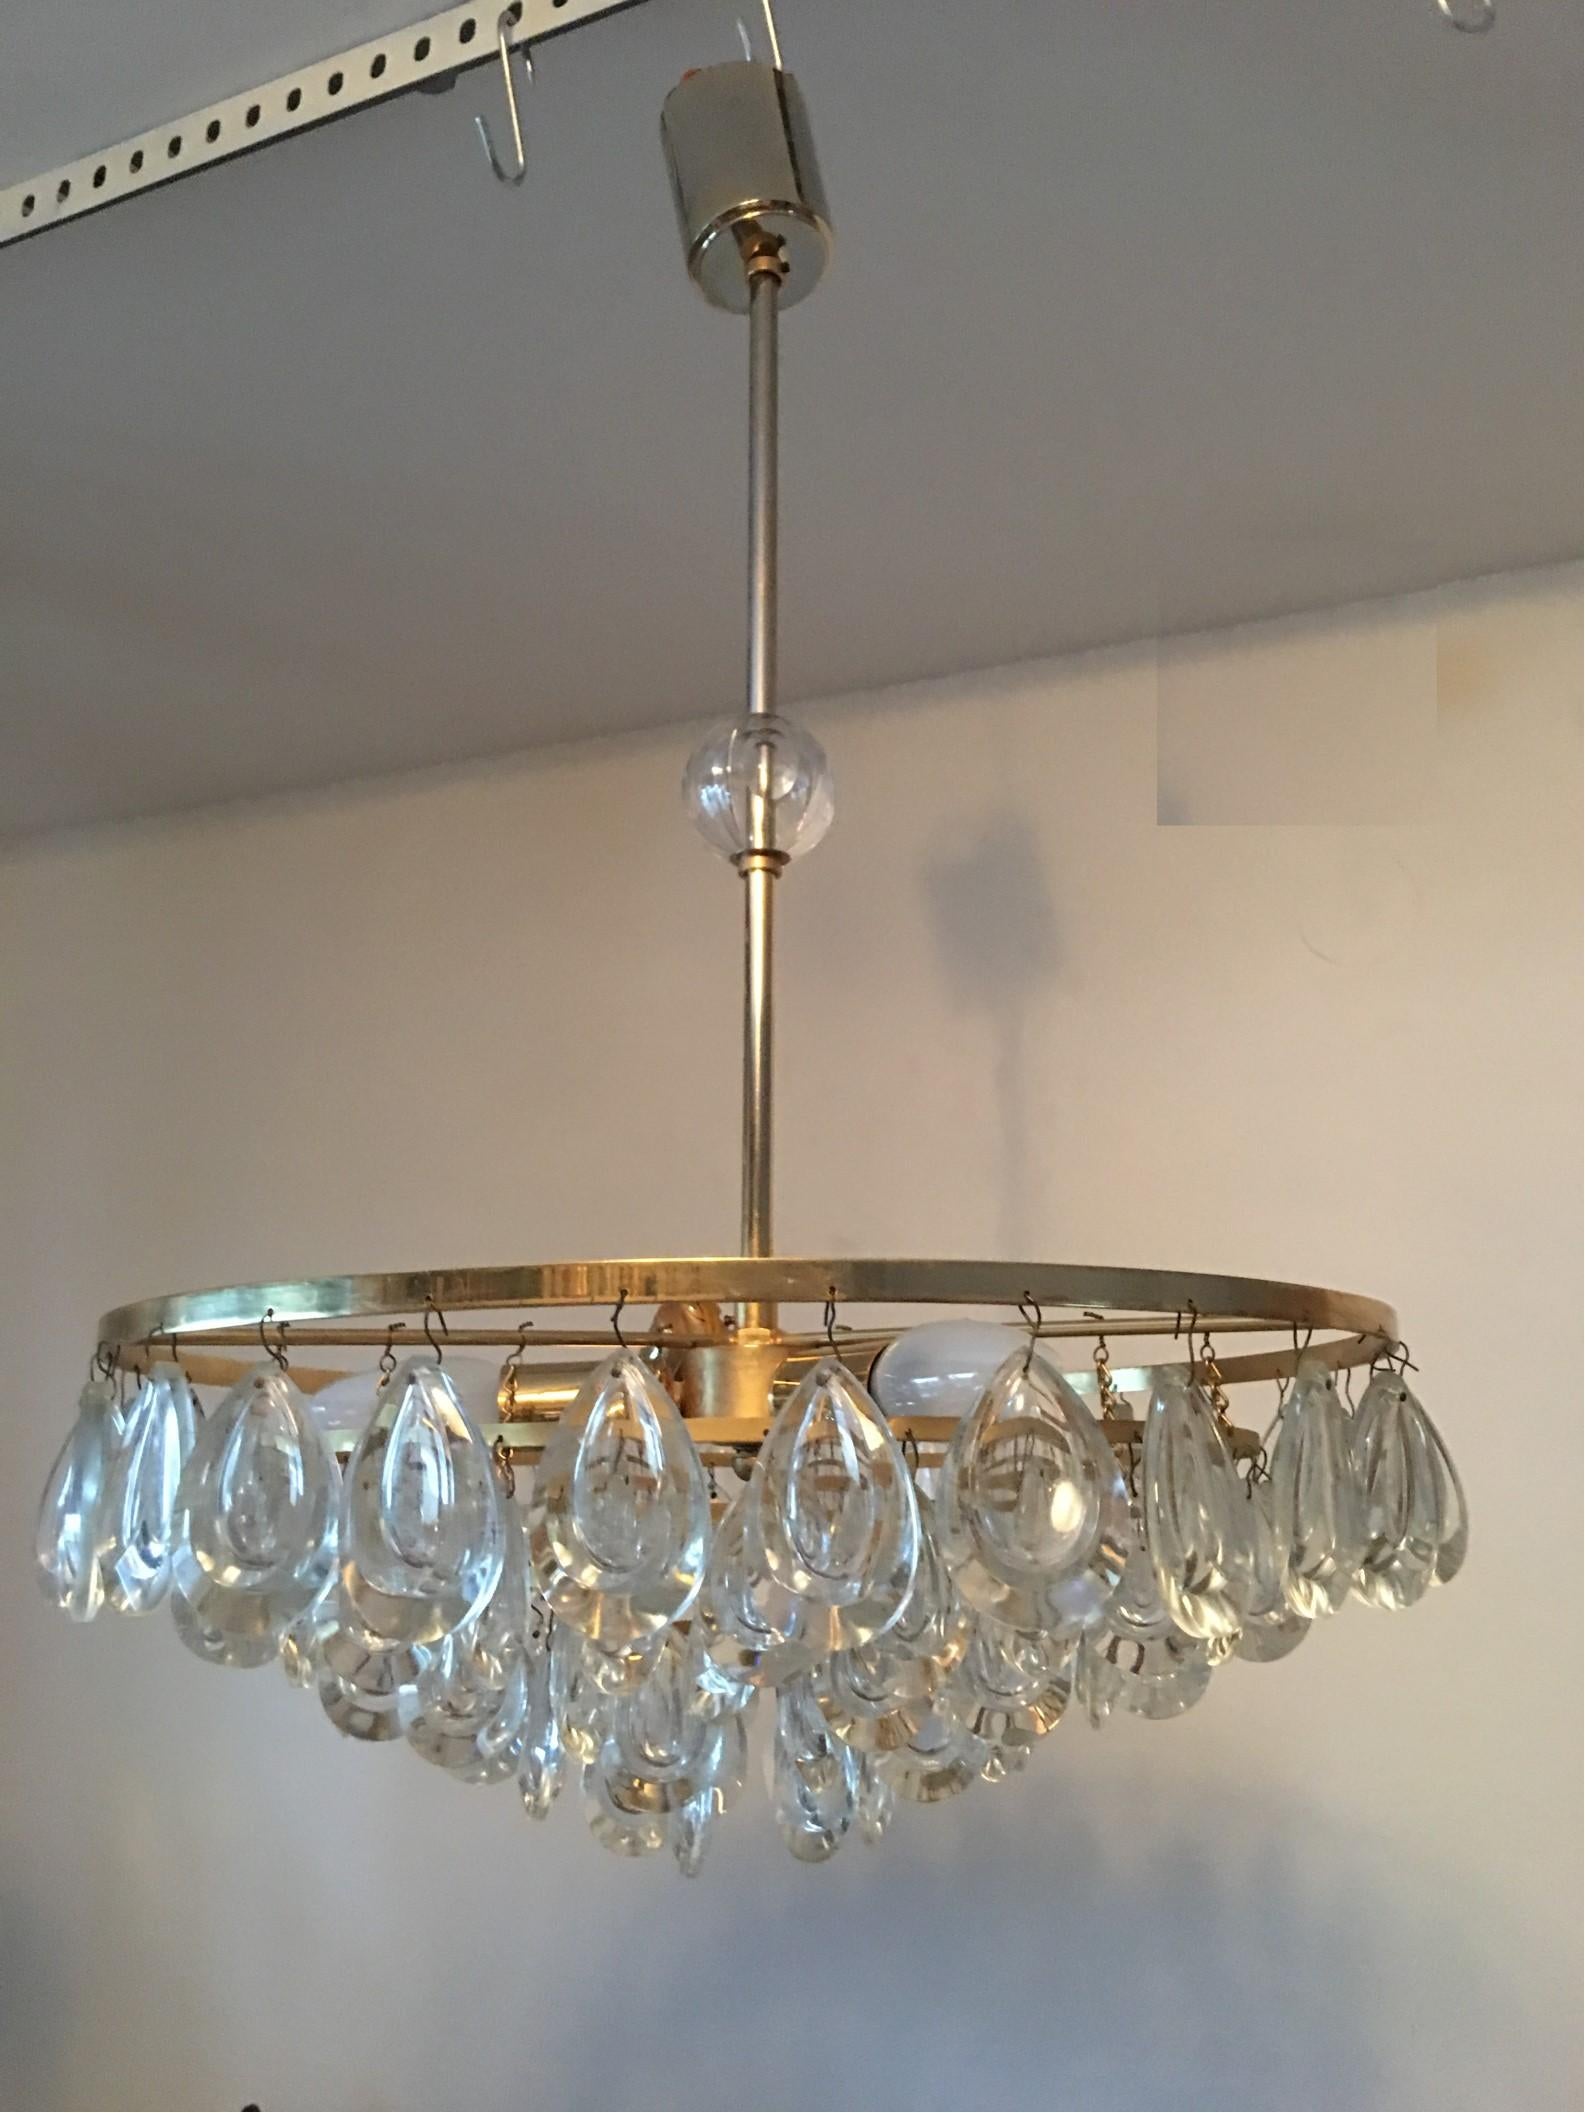 Five-Tiered crystal Glass Drop Chandelier by Palwa of Germany from the 1970s In Good Condition For Sale In Frisco, TX